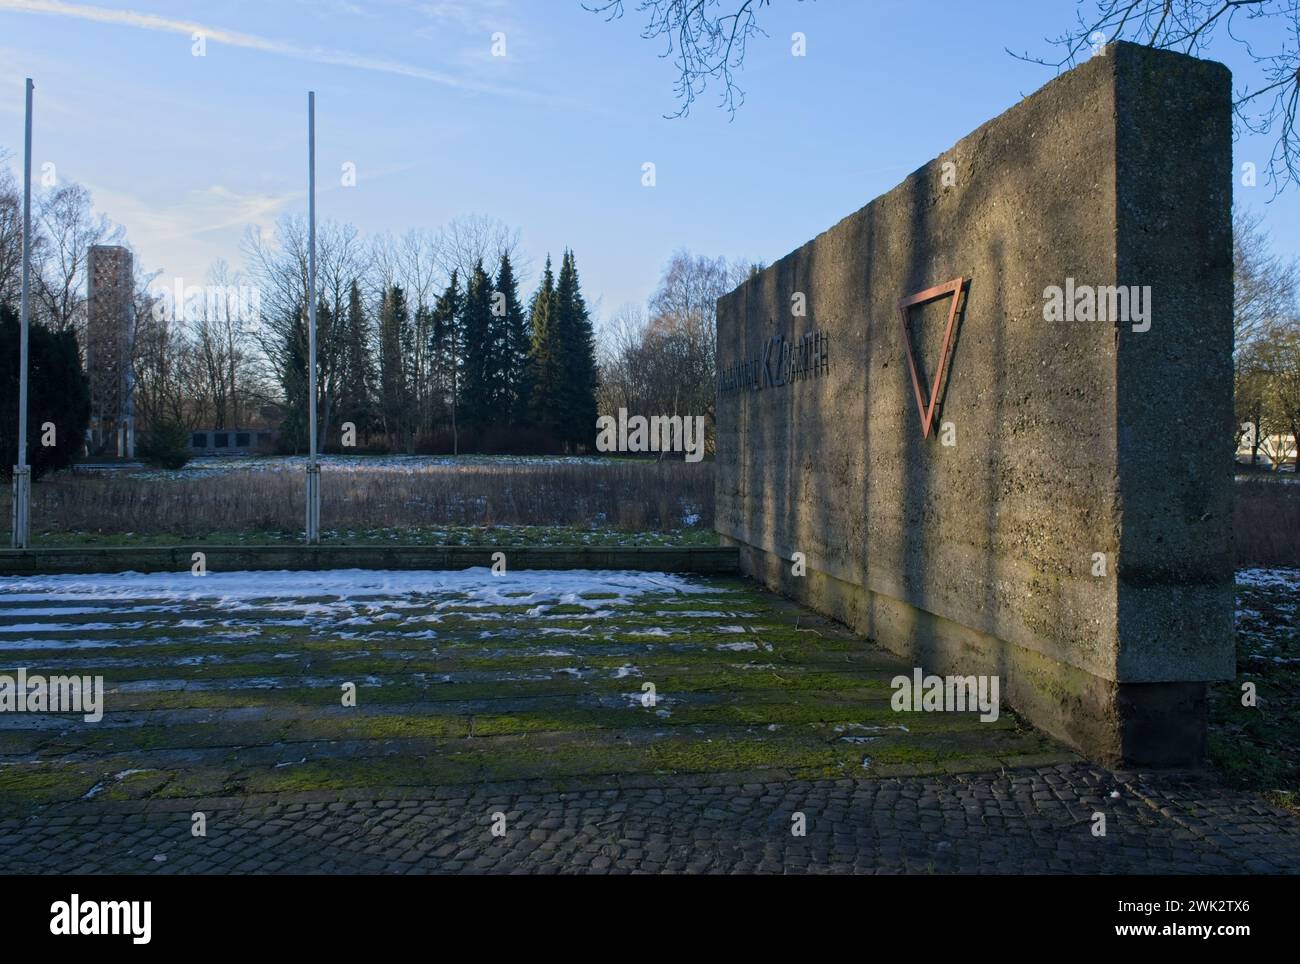 Barth, Germany - Jan 11, 2024: Concentration camp Barth was a sub-camp of concentration camp Ravensbruck during WWII. A total of 7,000 people were imp Stock Photo